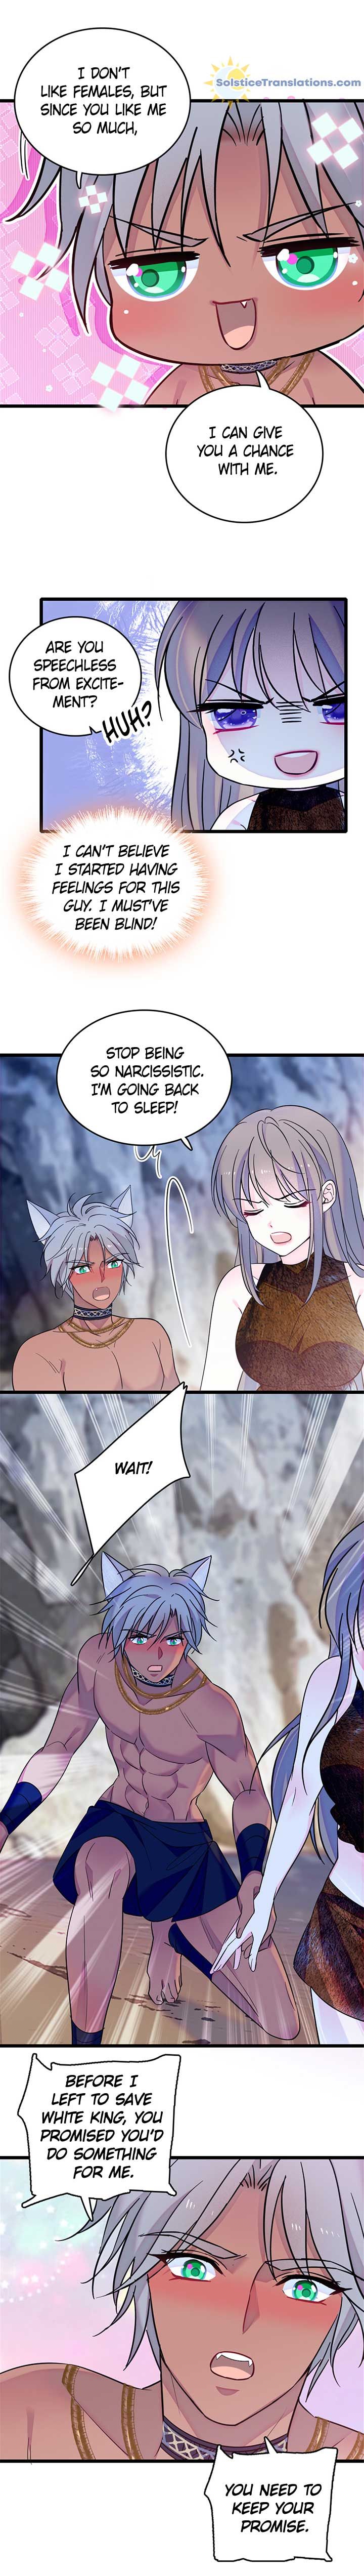 Romance in the Beast World Chapter 41 page 7